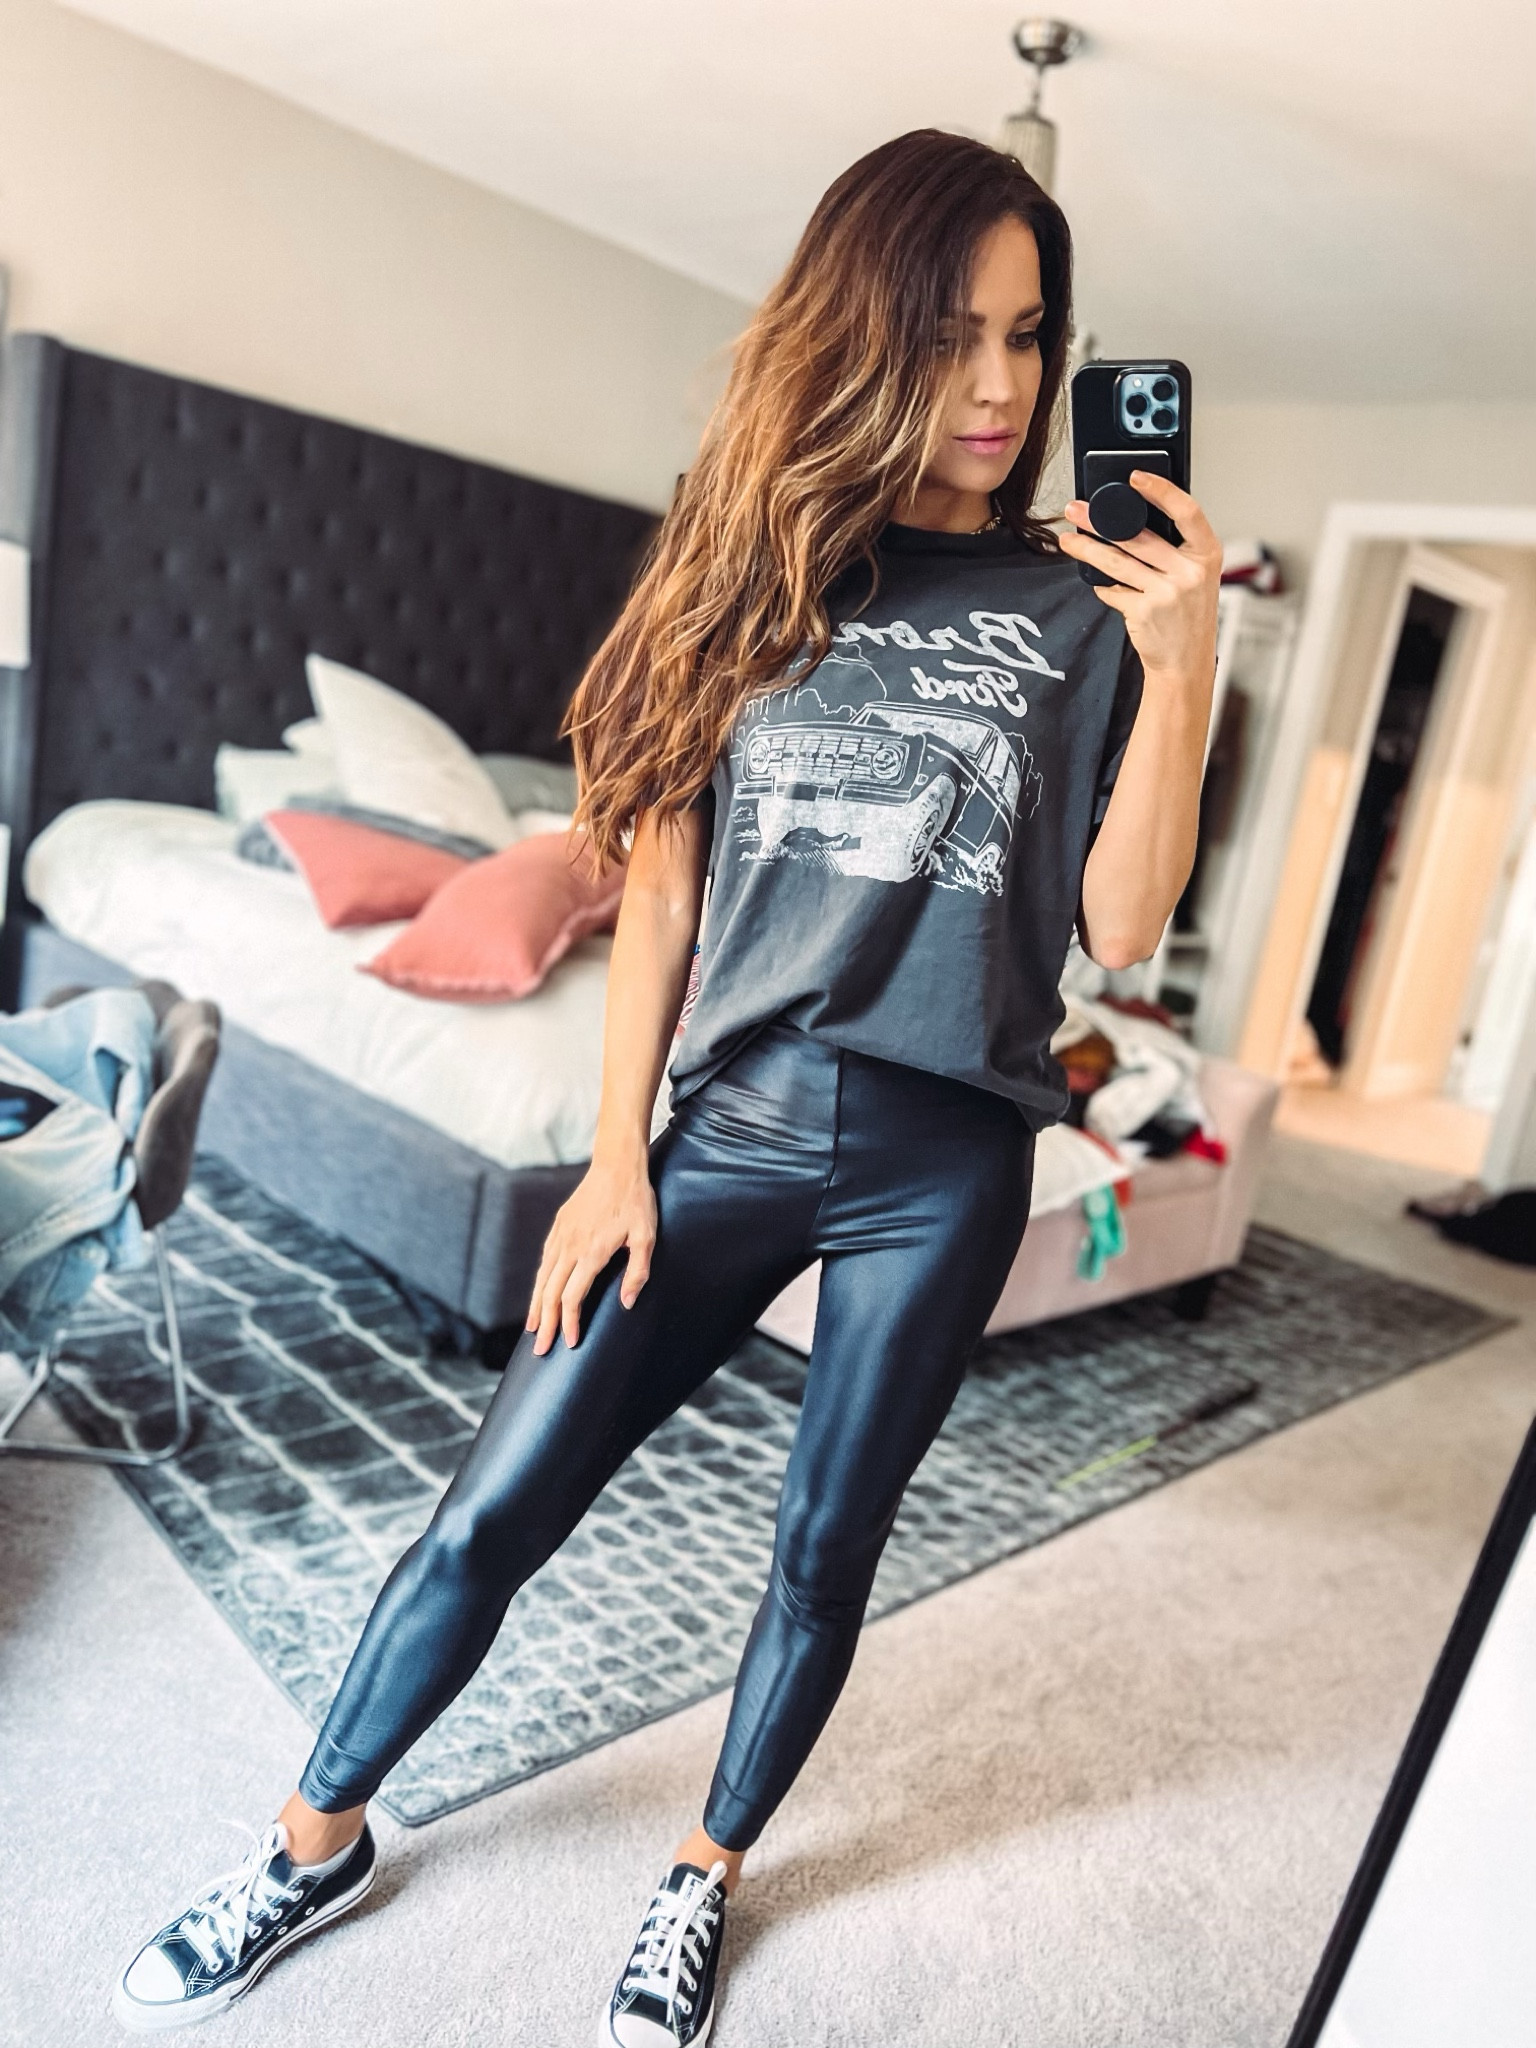 Amazing Mirage Metallics 🎉💜, Hey everyone, check out these leggings!!!  🤩 These are our Mirage Metallic Light n tights and they are AMAZING!!!! I  LOVE them 🎉😍